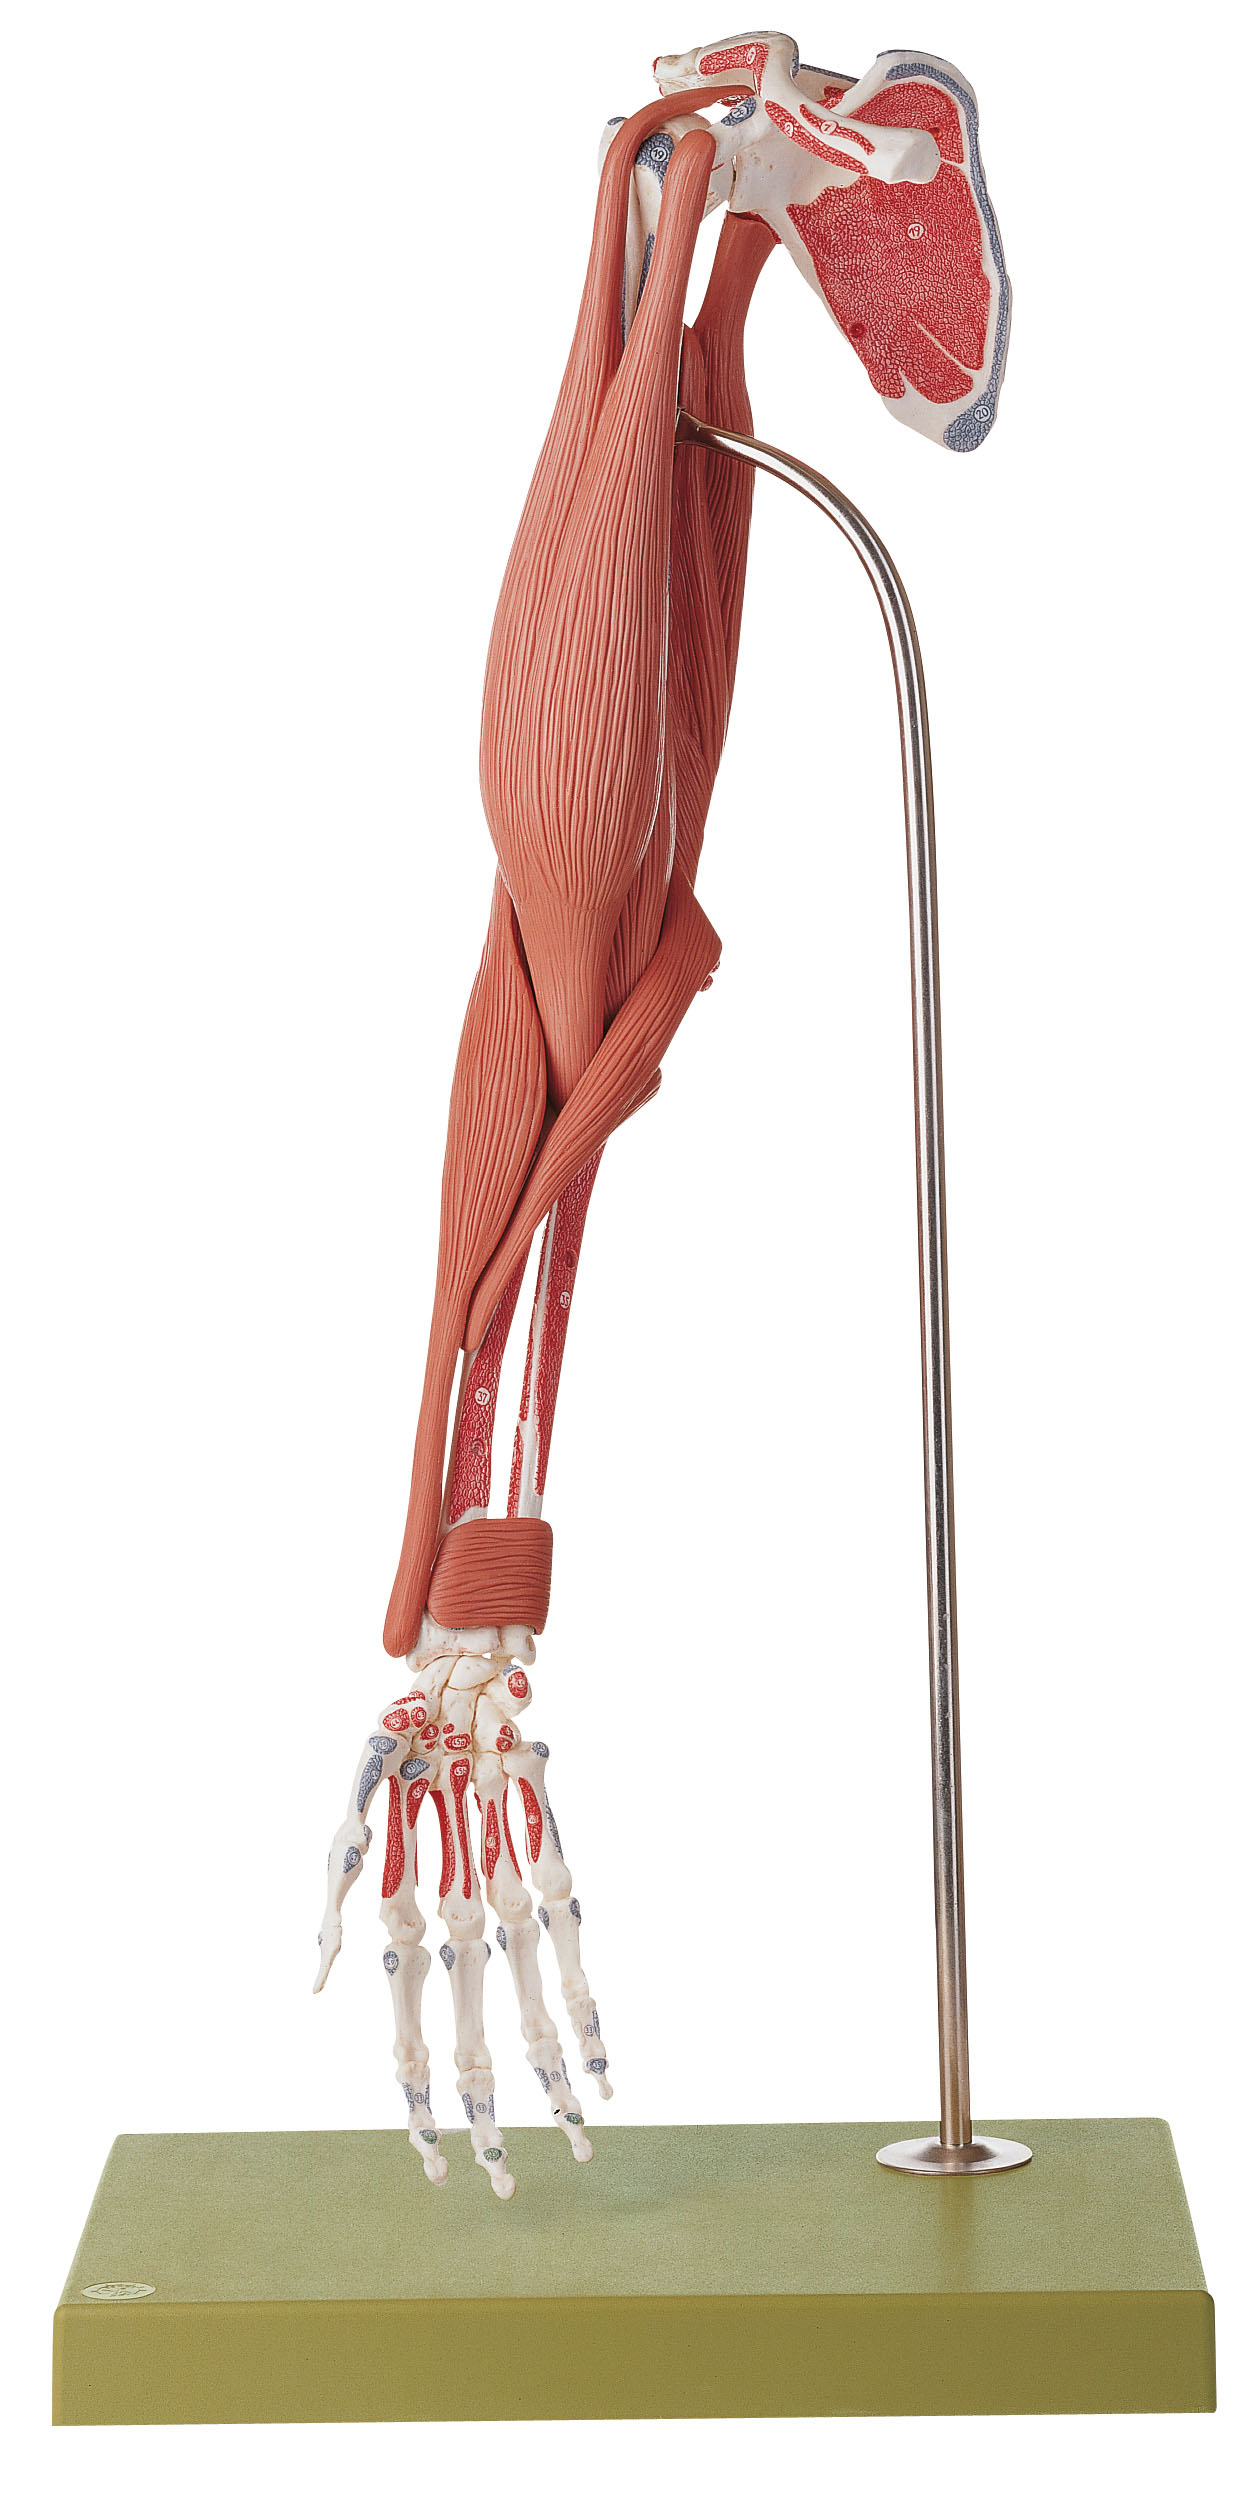 Demonstration Model of the Arm Muscles – 10 Parts